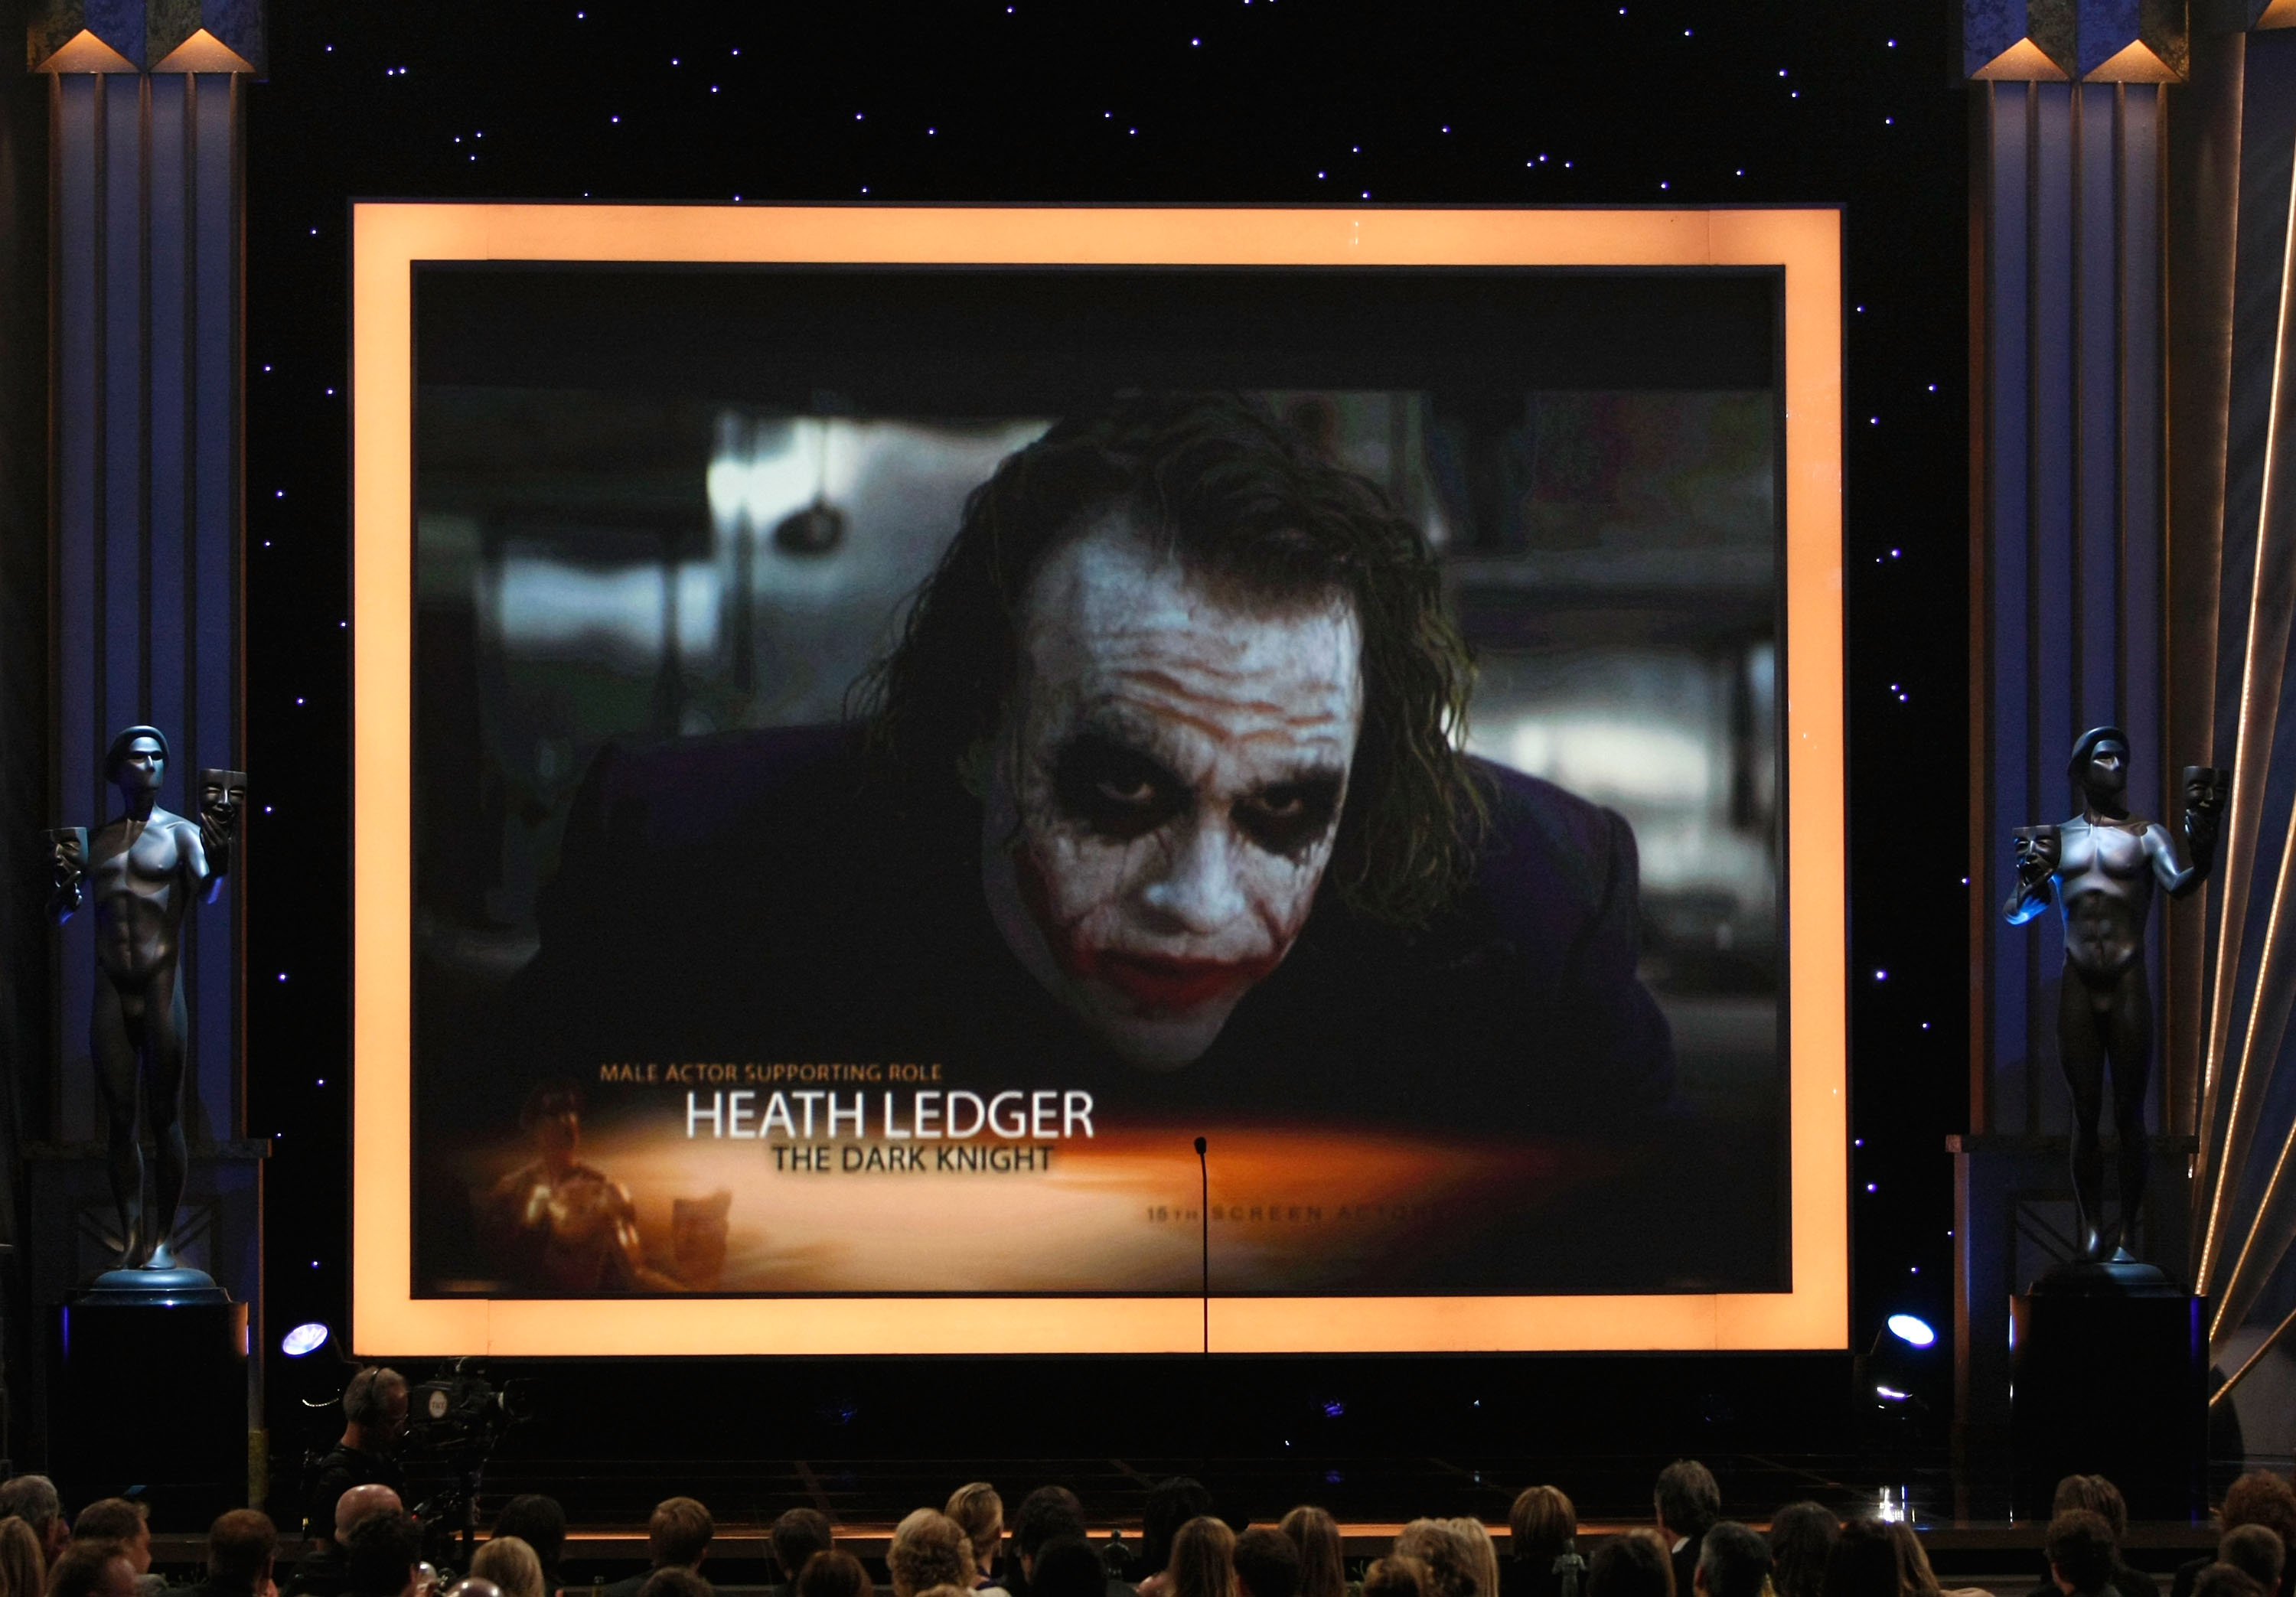 A screen projecting an image of Heath Ledger as the Joker